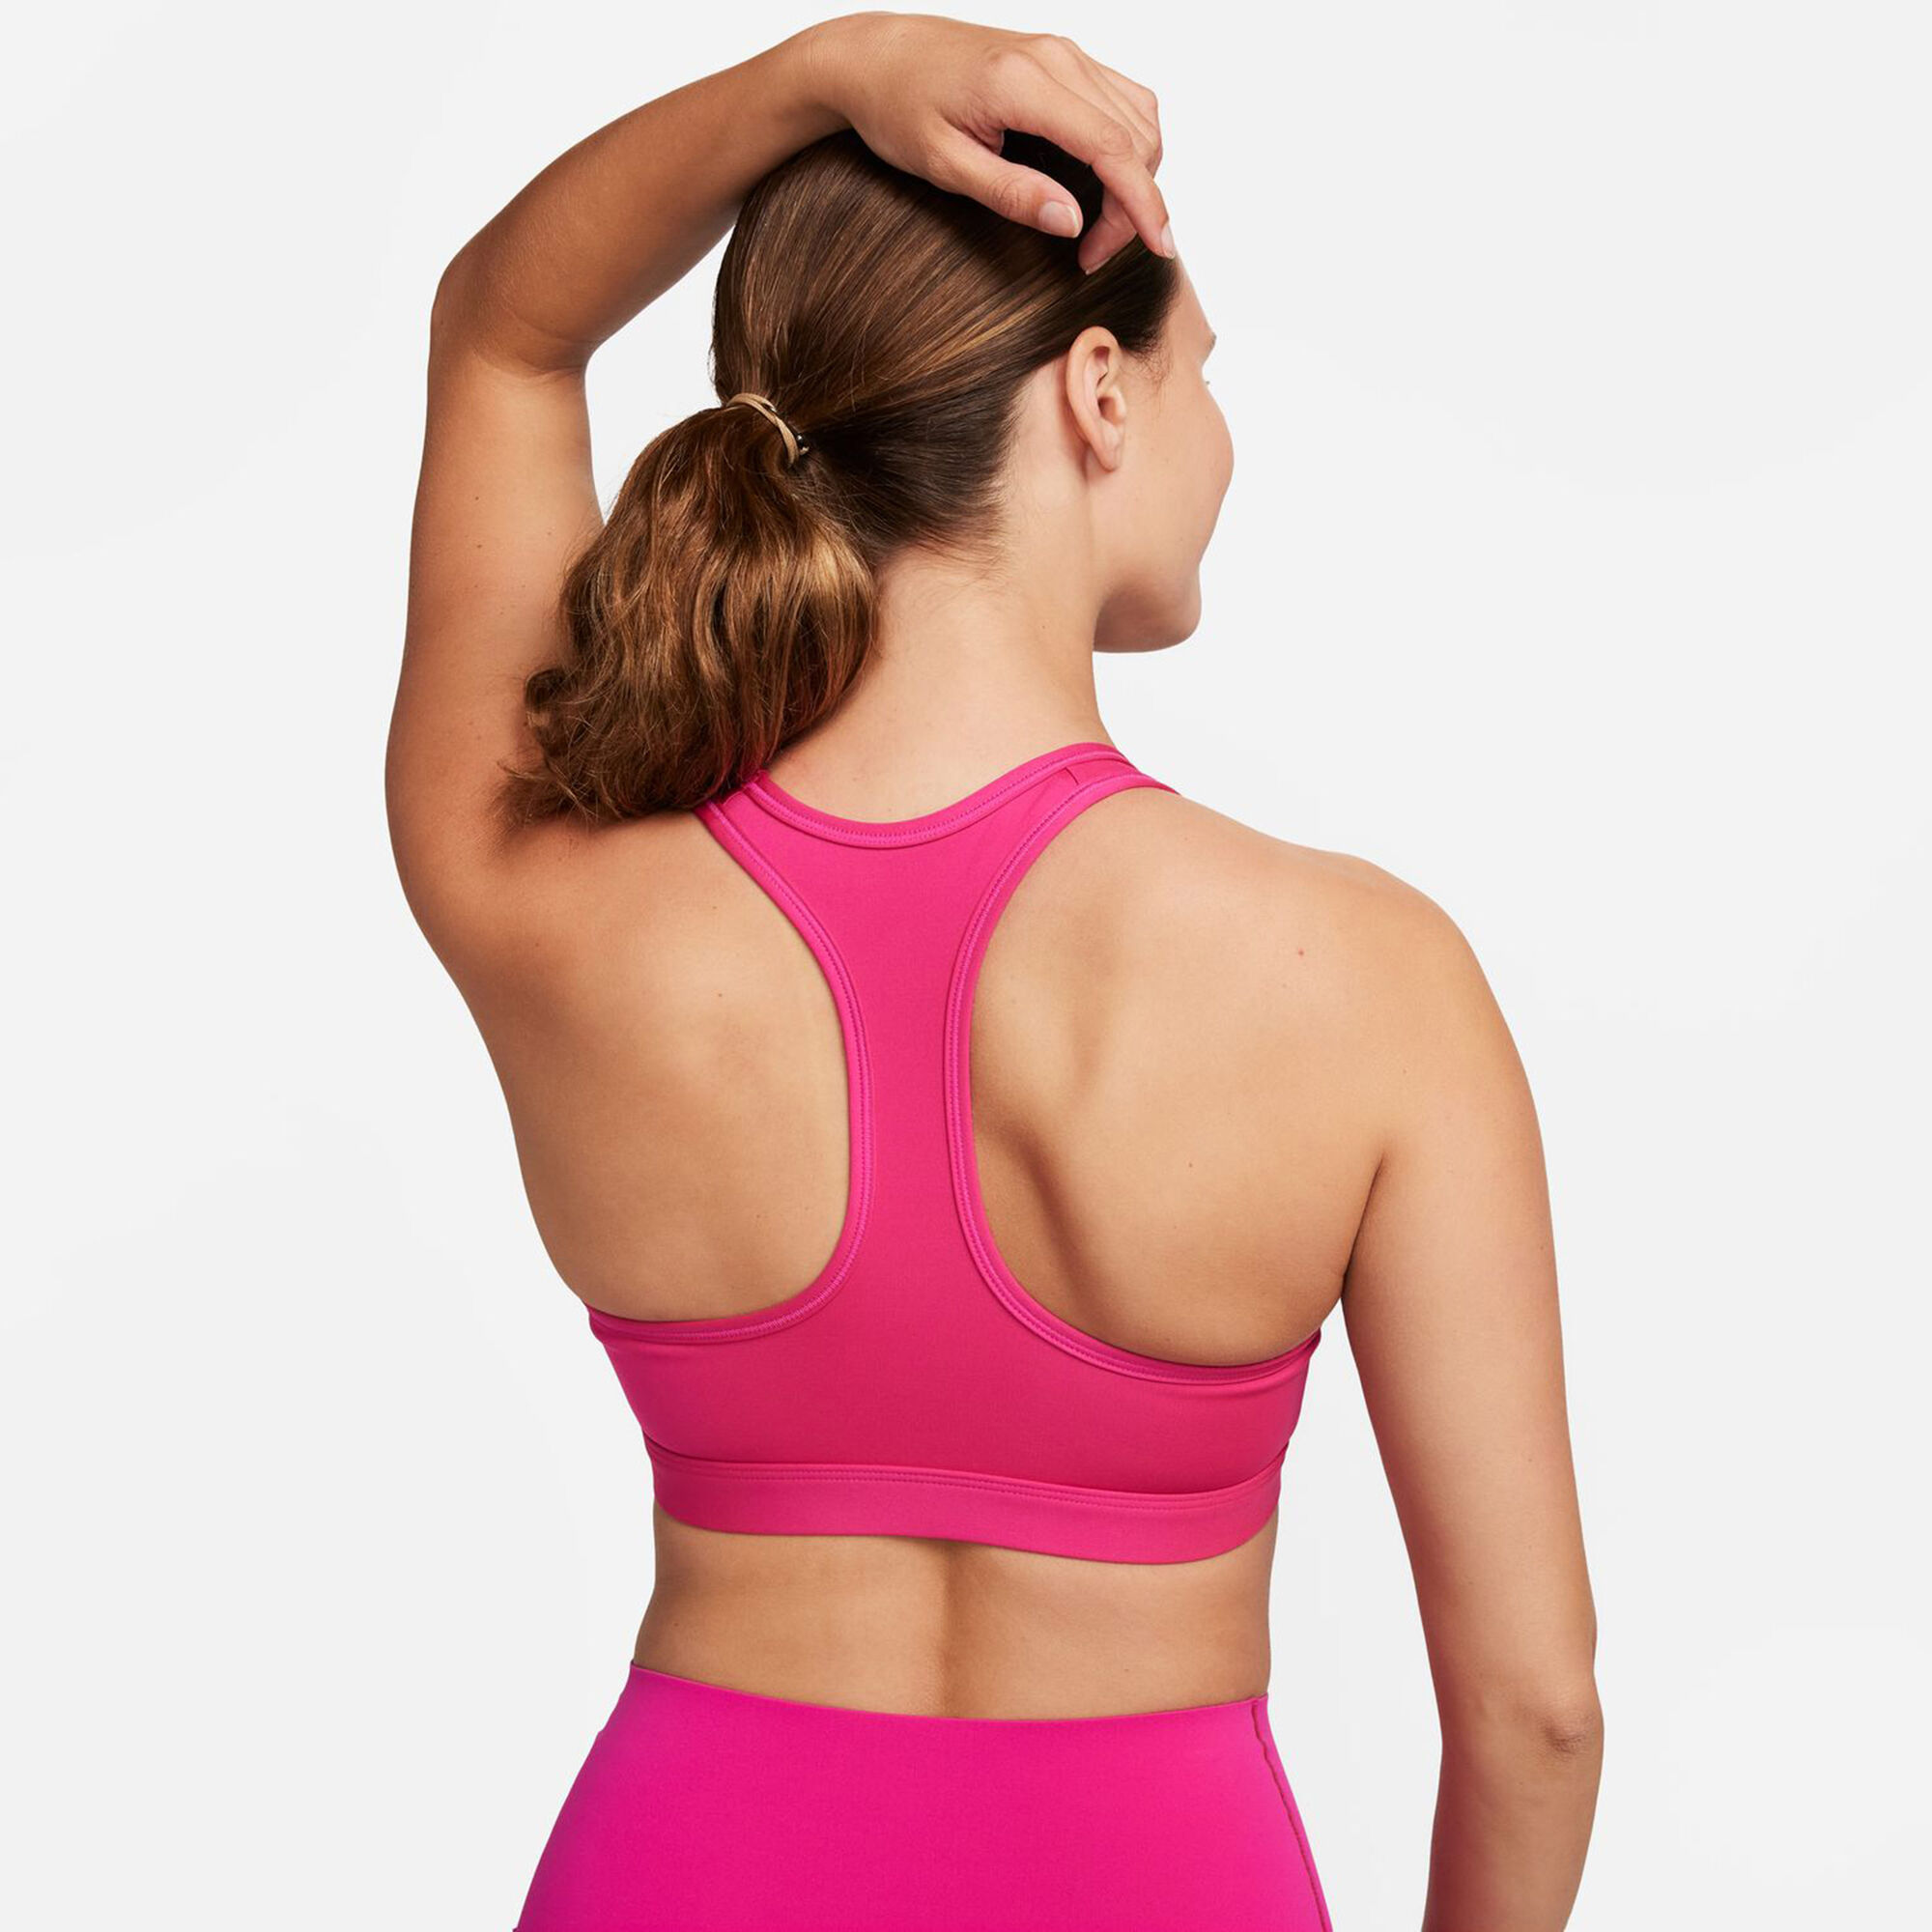 if you have a bigger chest & can never find good supportive sports bra, nike swoosh